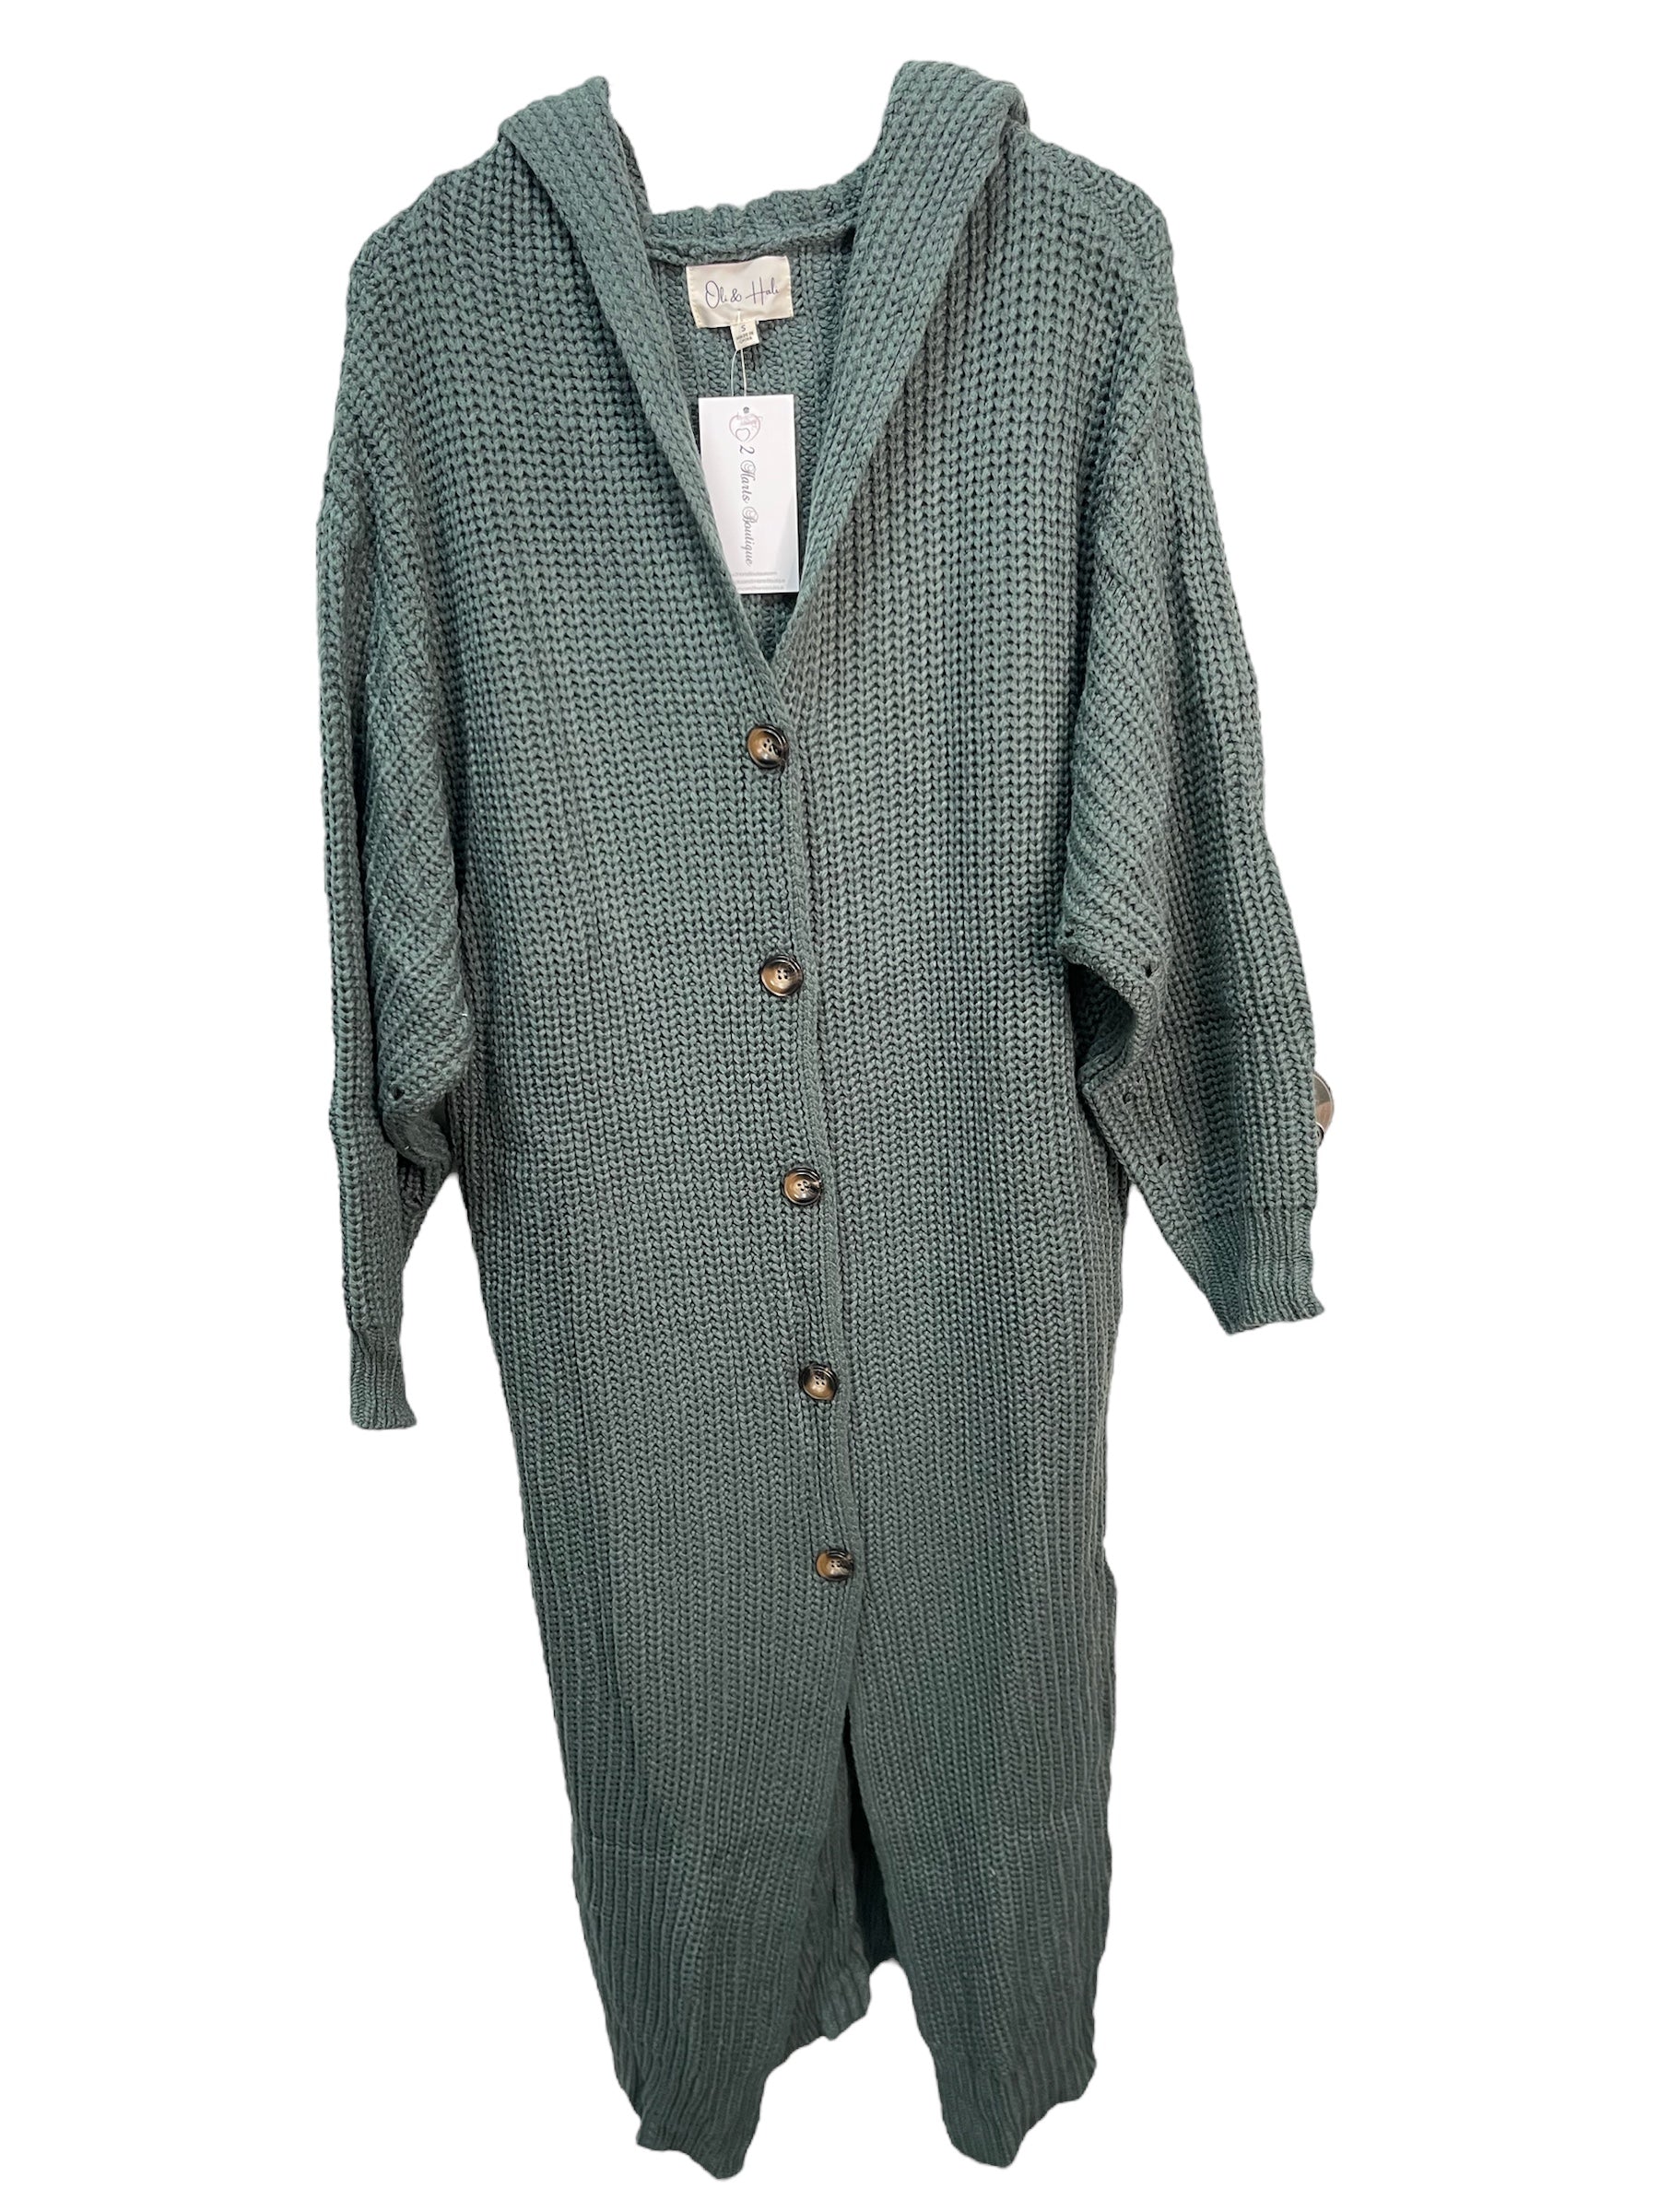 Hooded Cardigan Duster Style Sweater in Teal